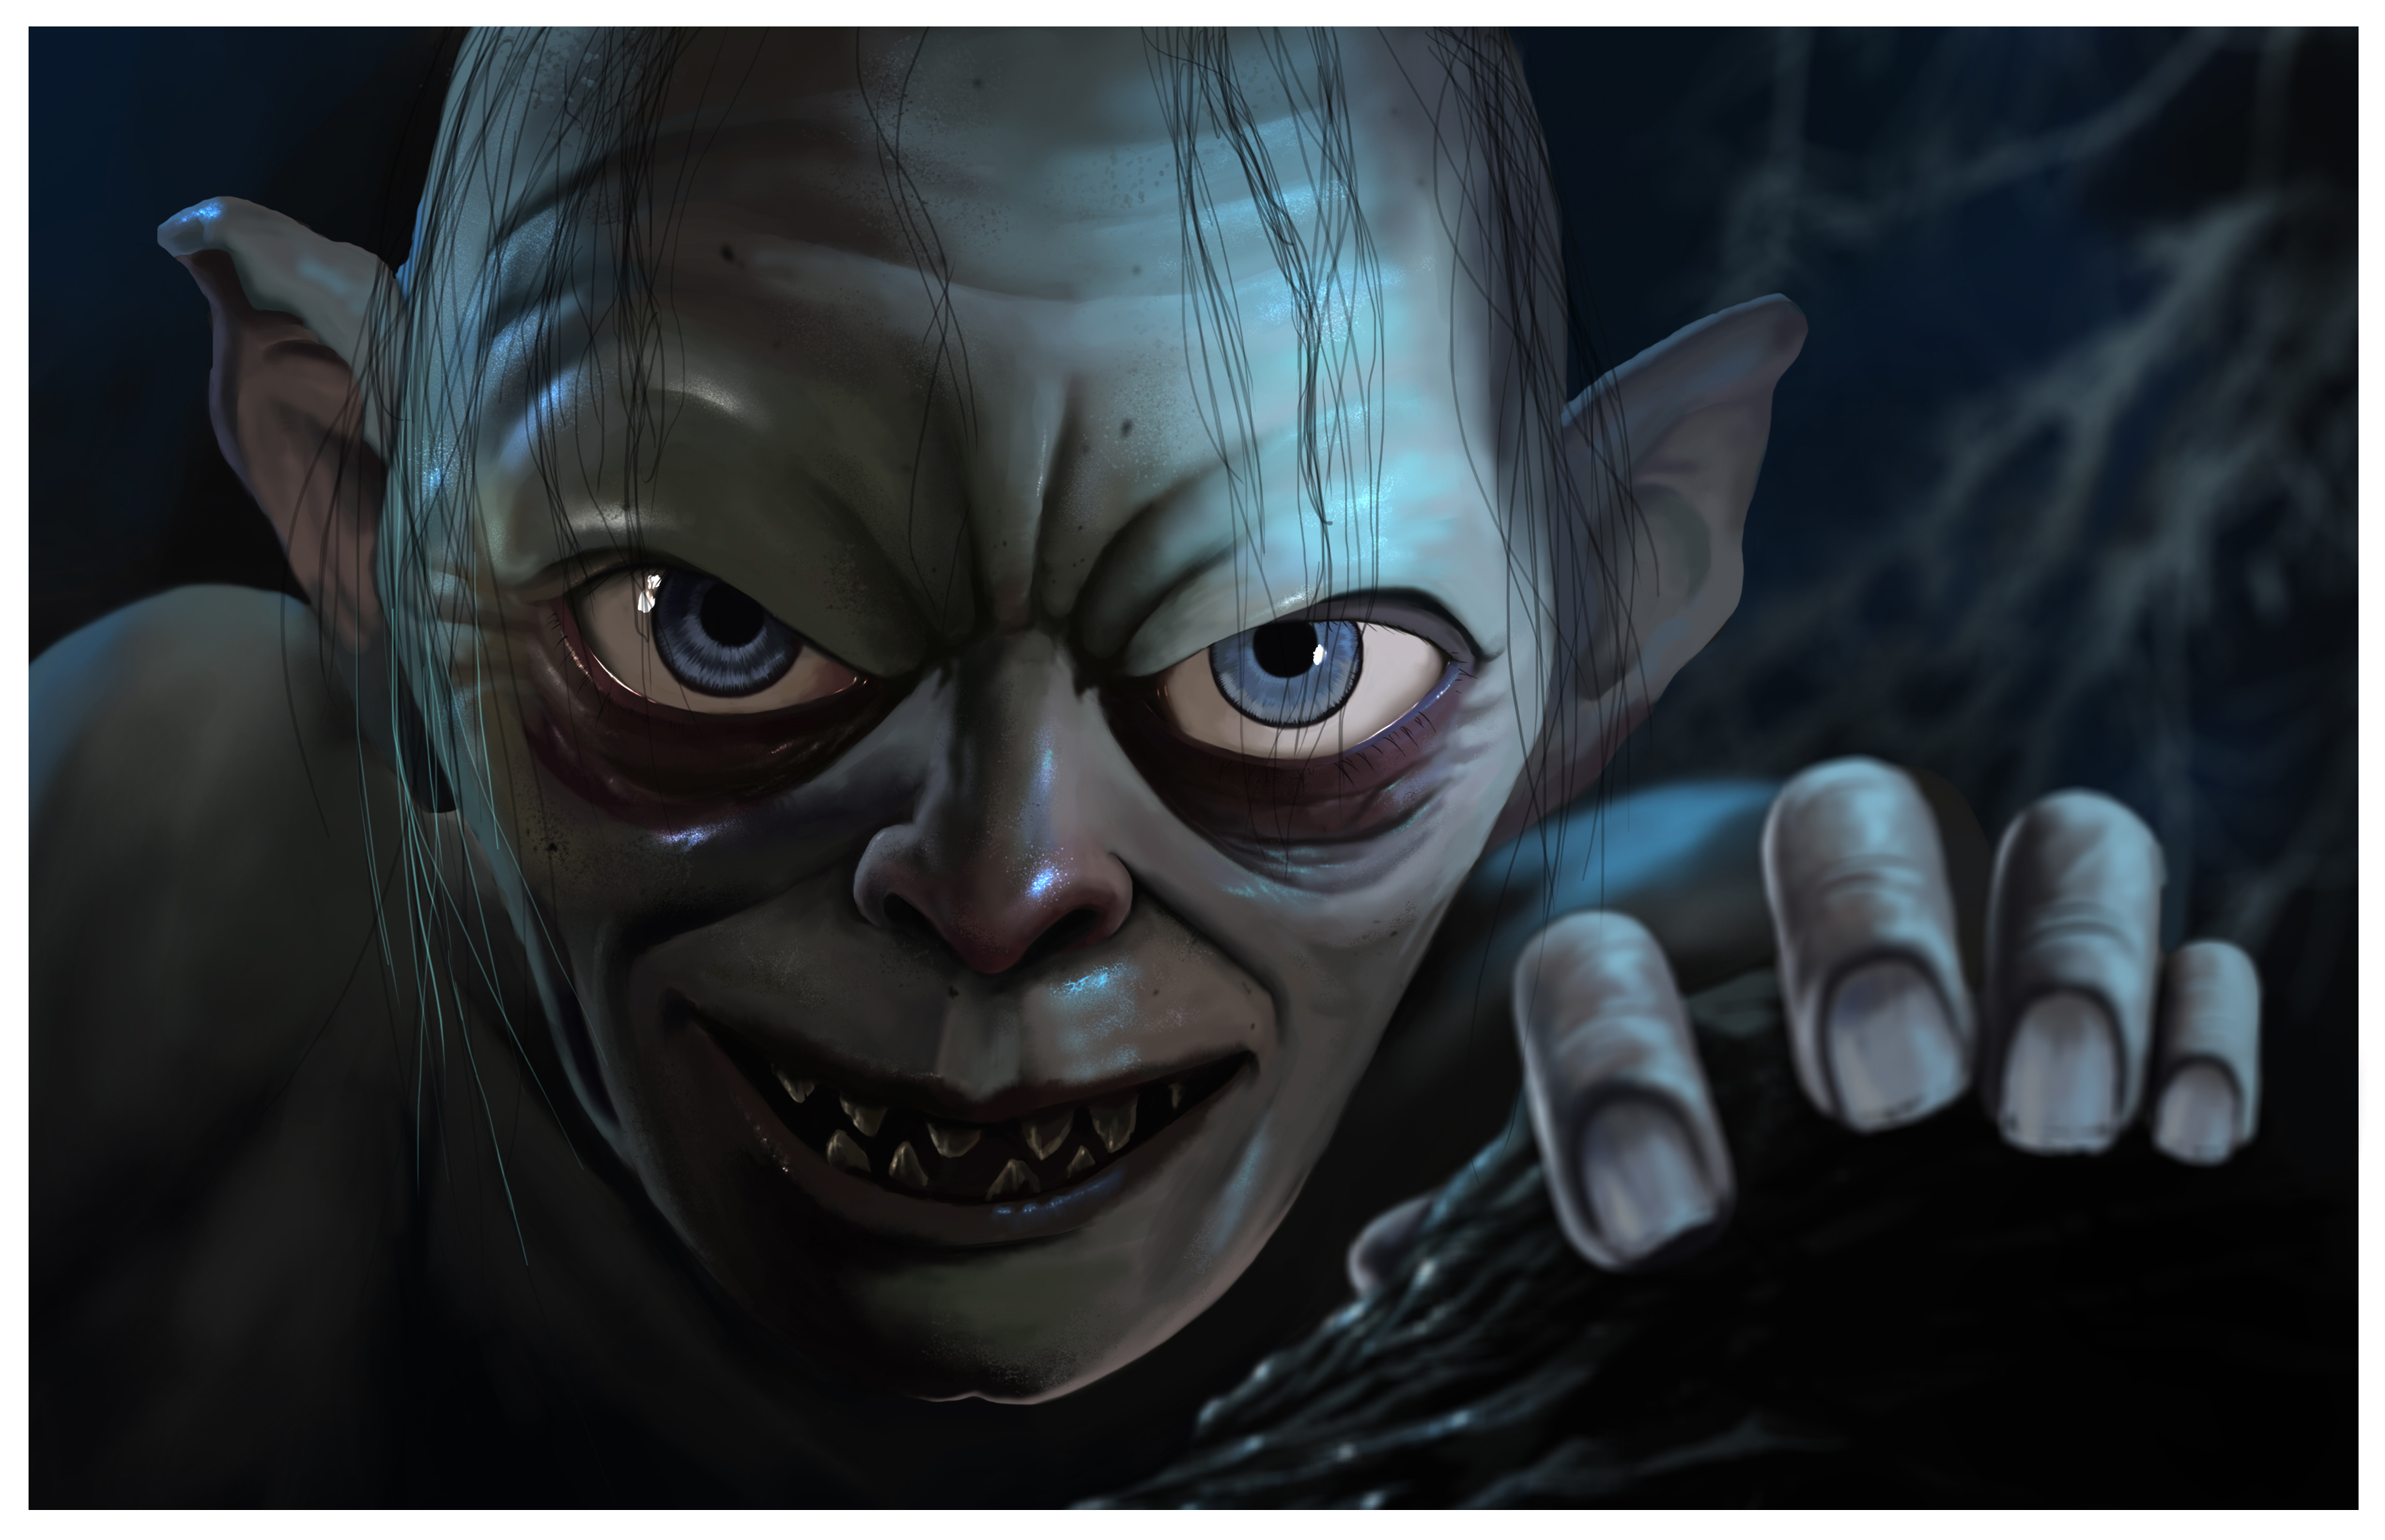 3339x2156 Download wallpaper eyes, face, art, lord of the rings, gollum, Sm&Atilde;&copy;agol, section films in resoluti